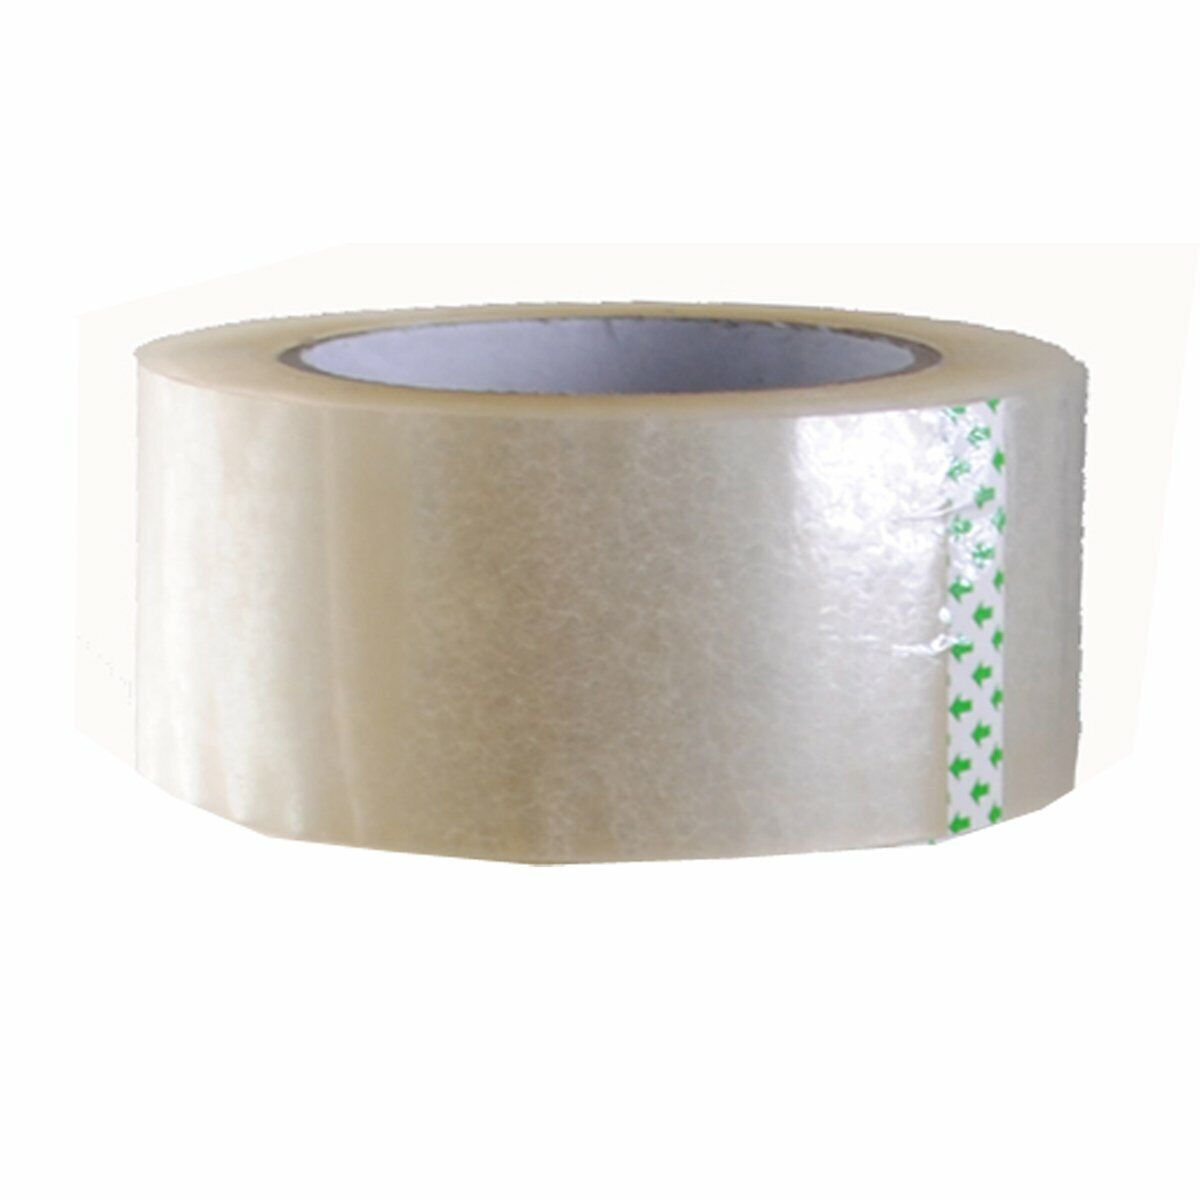 10 Rolls Clear Packing Tape 2.0 Mil Box Shipping Packaging Tape